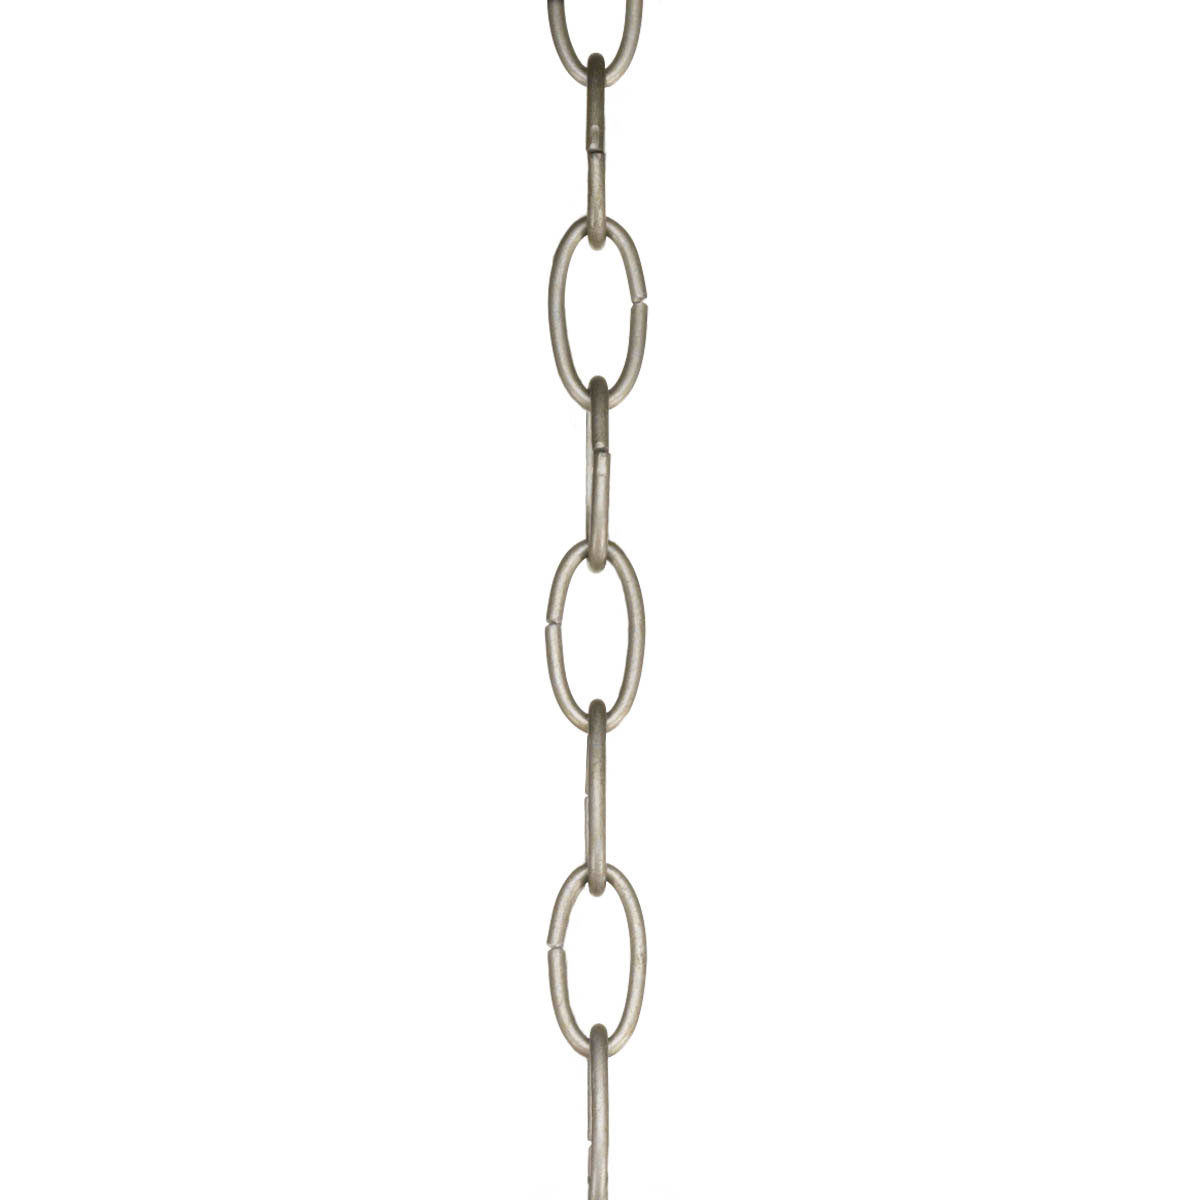 Ten feet of 9 gauge chain in Silver Ridge finish. Solid chain permits installation of chain-hung fixtures on high ceilings. Maximum fixture weight 50 lbs.